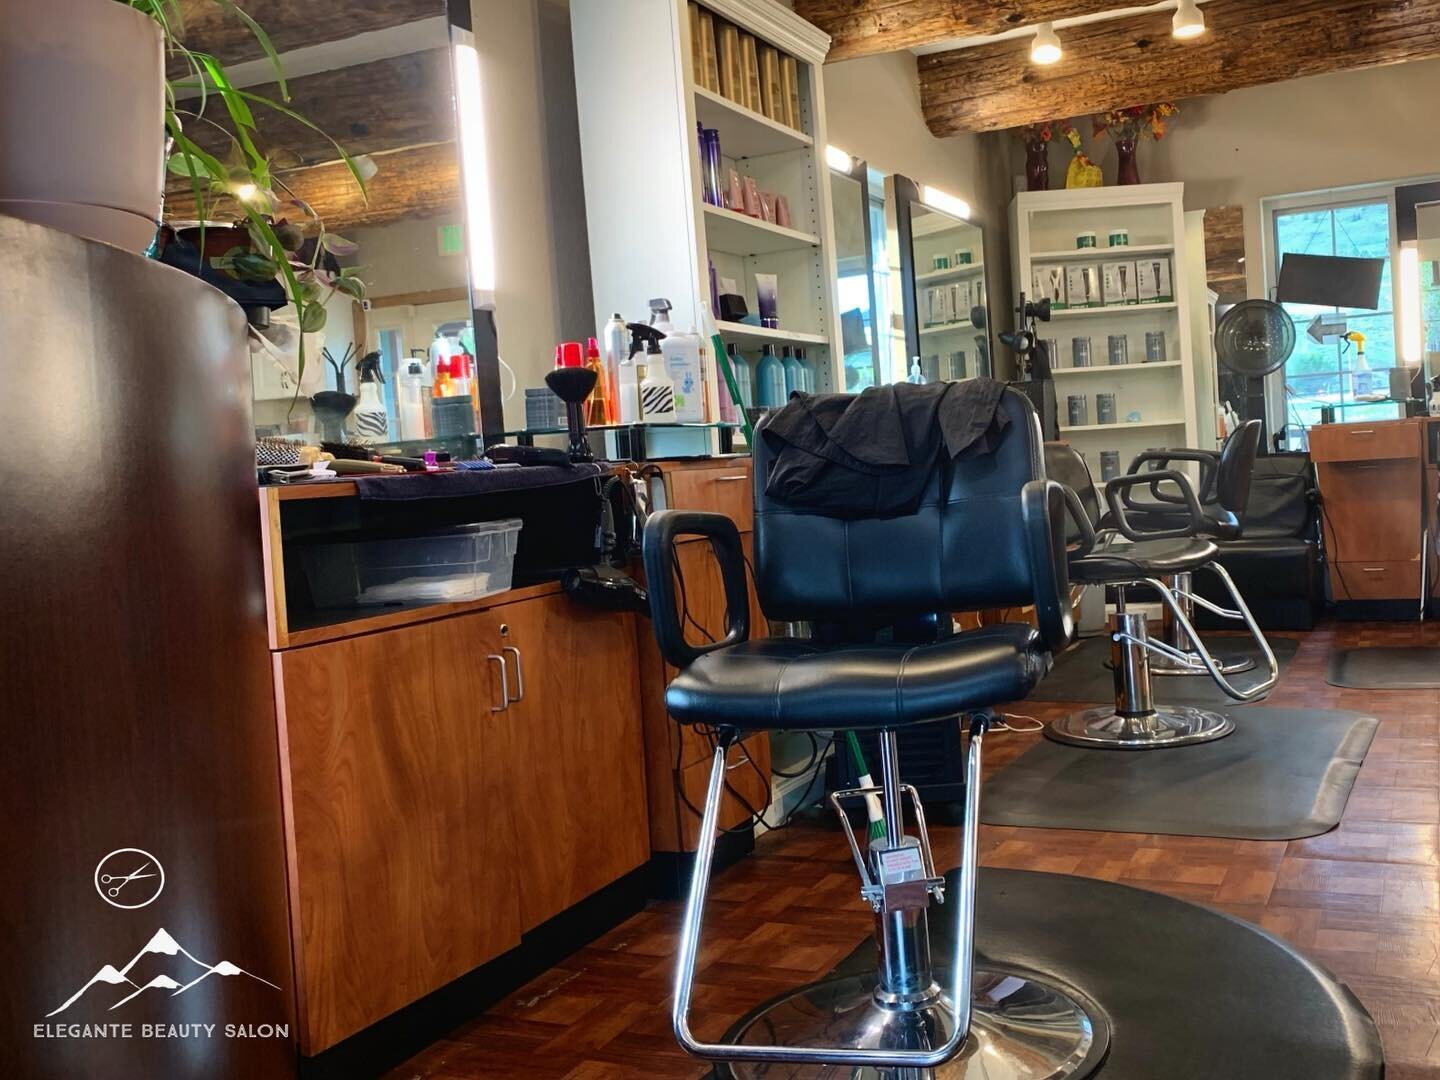 beauty comes from inside, inside the beauty salon (: 

contact us or book online for an appointment. We look forward to seeing you!

#colorado #dillon #silverthorne #frisco #breckenridge